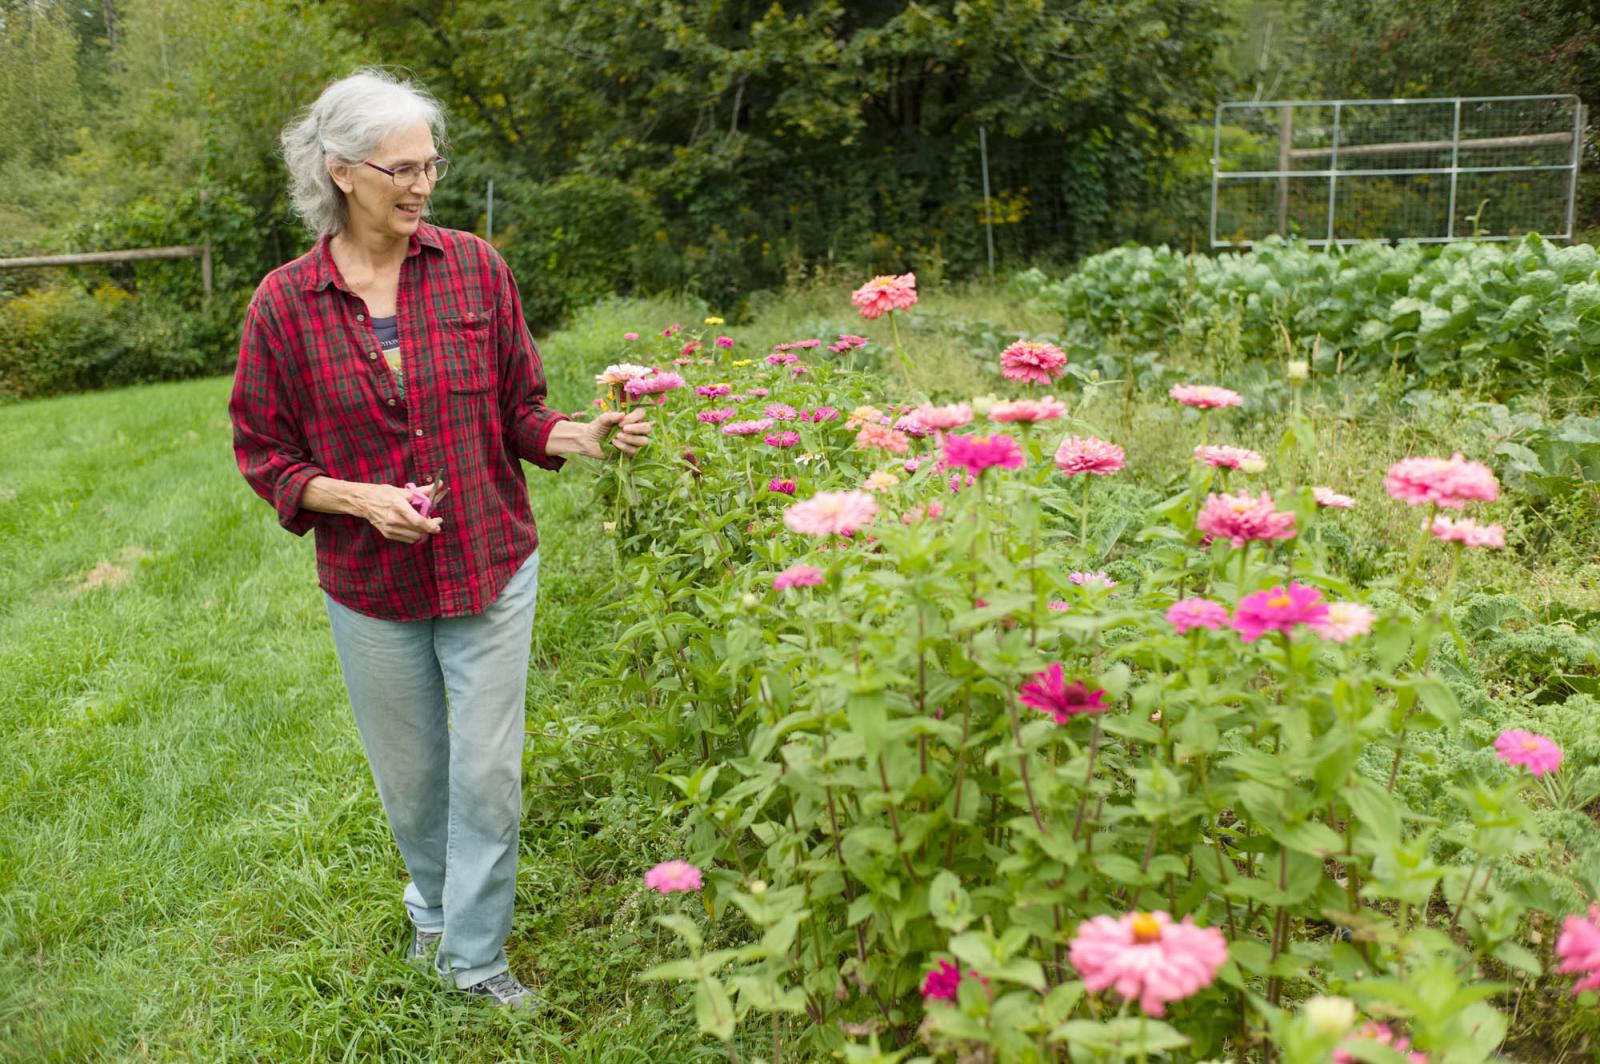 Farming for the Neighbors - Marjorie, who lives in the nearby town of Keene, picks flowers on Hillside Springs Farm. This is...